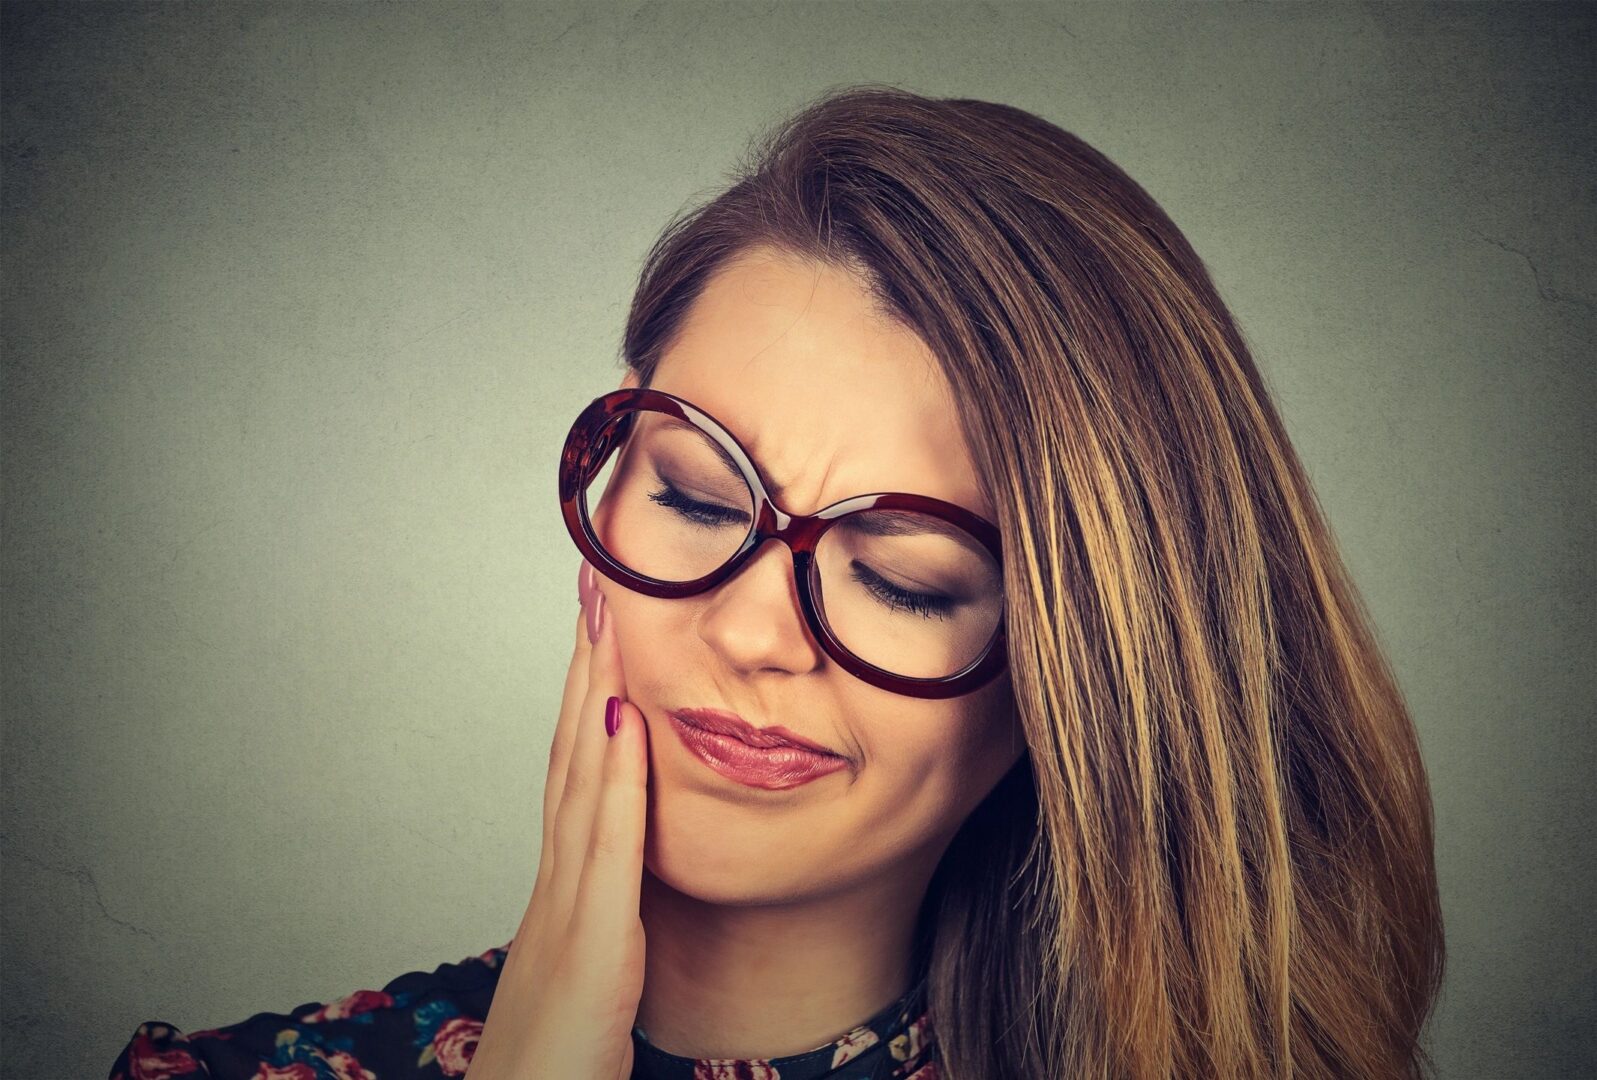 A woman with glasses is holding her face